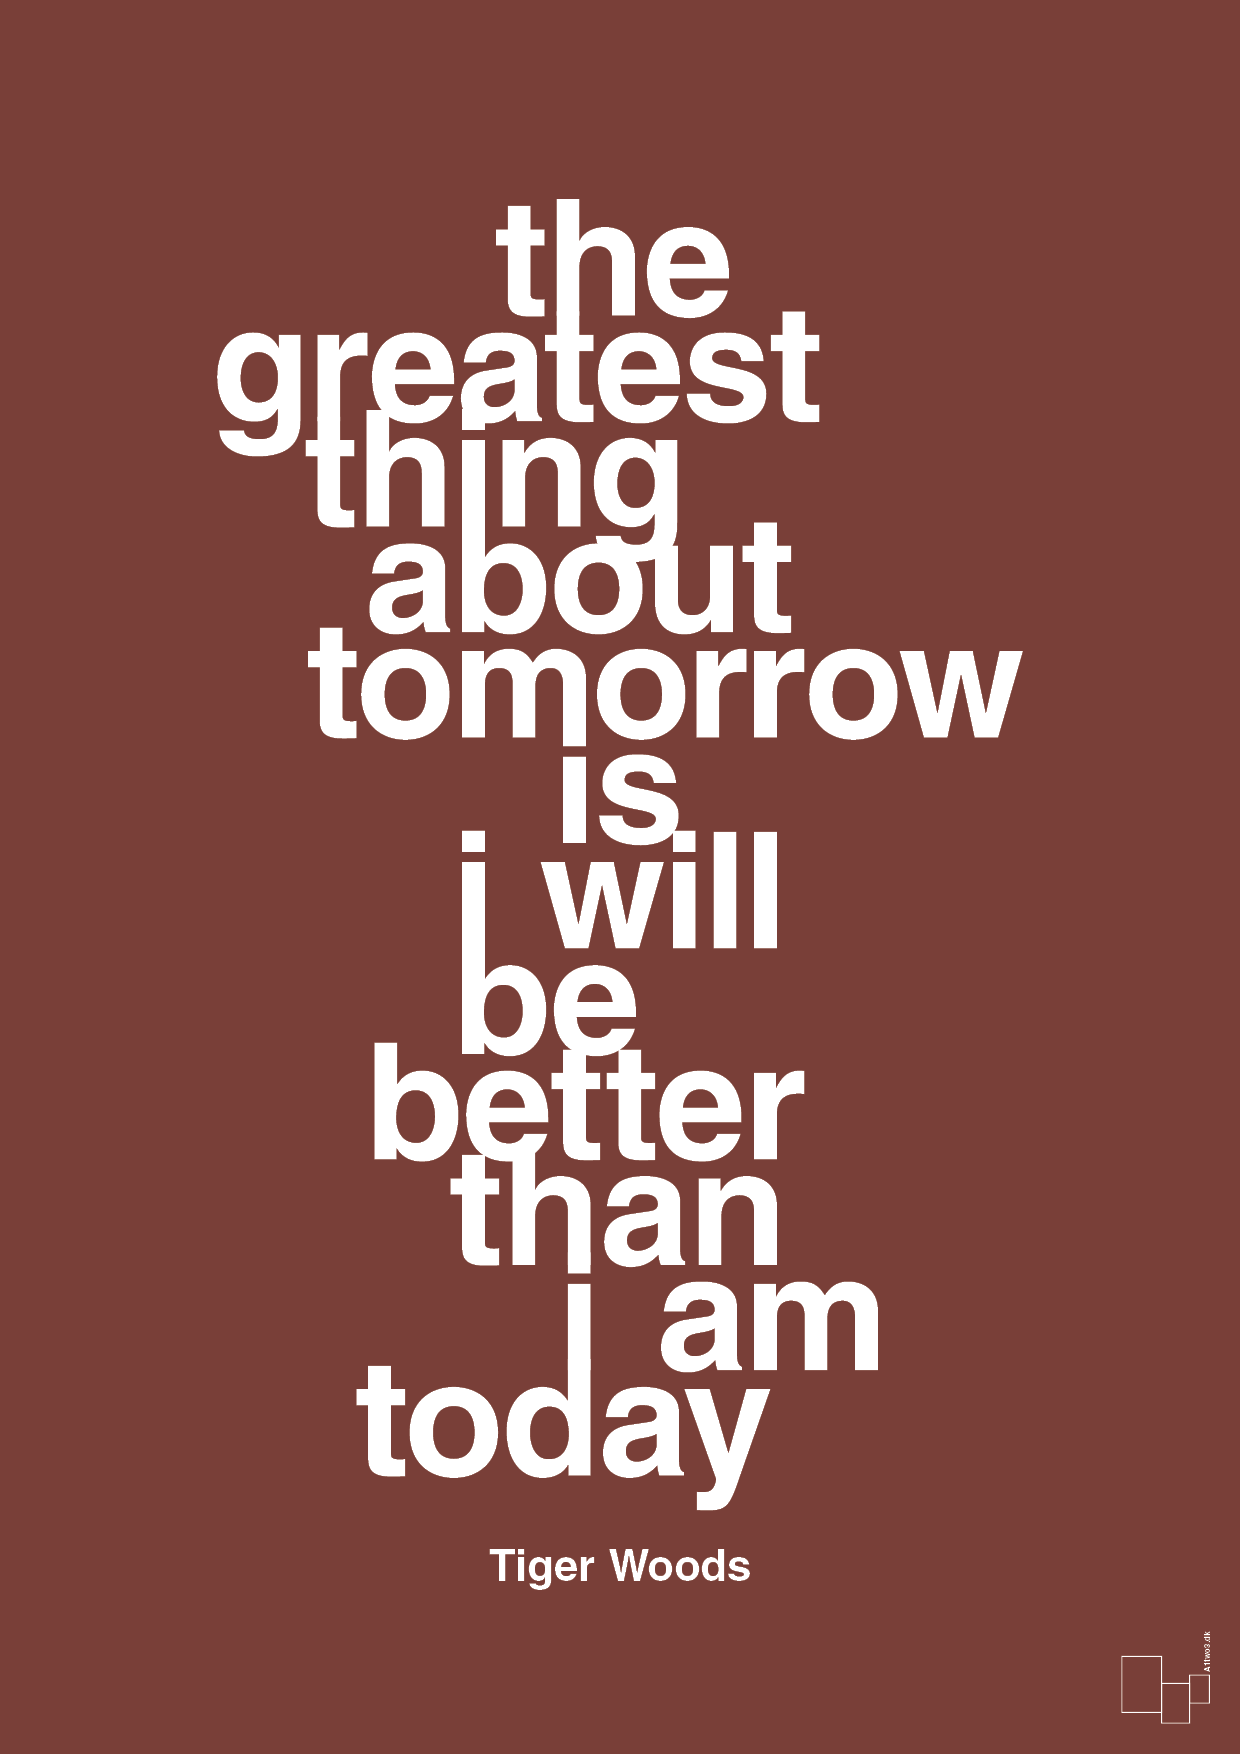 the greatest thing about tomorrow is i will be better than i am today - Plakat med Citater i Red Pepper